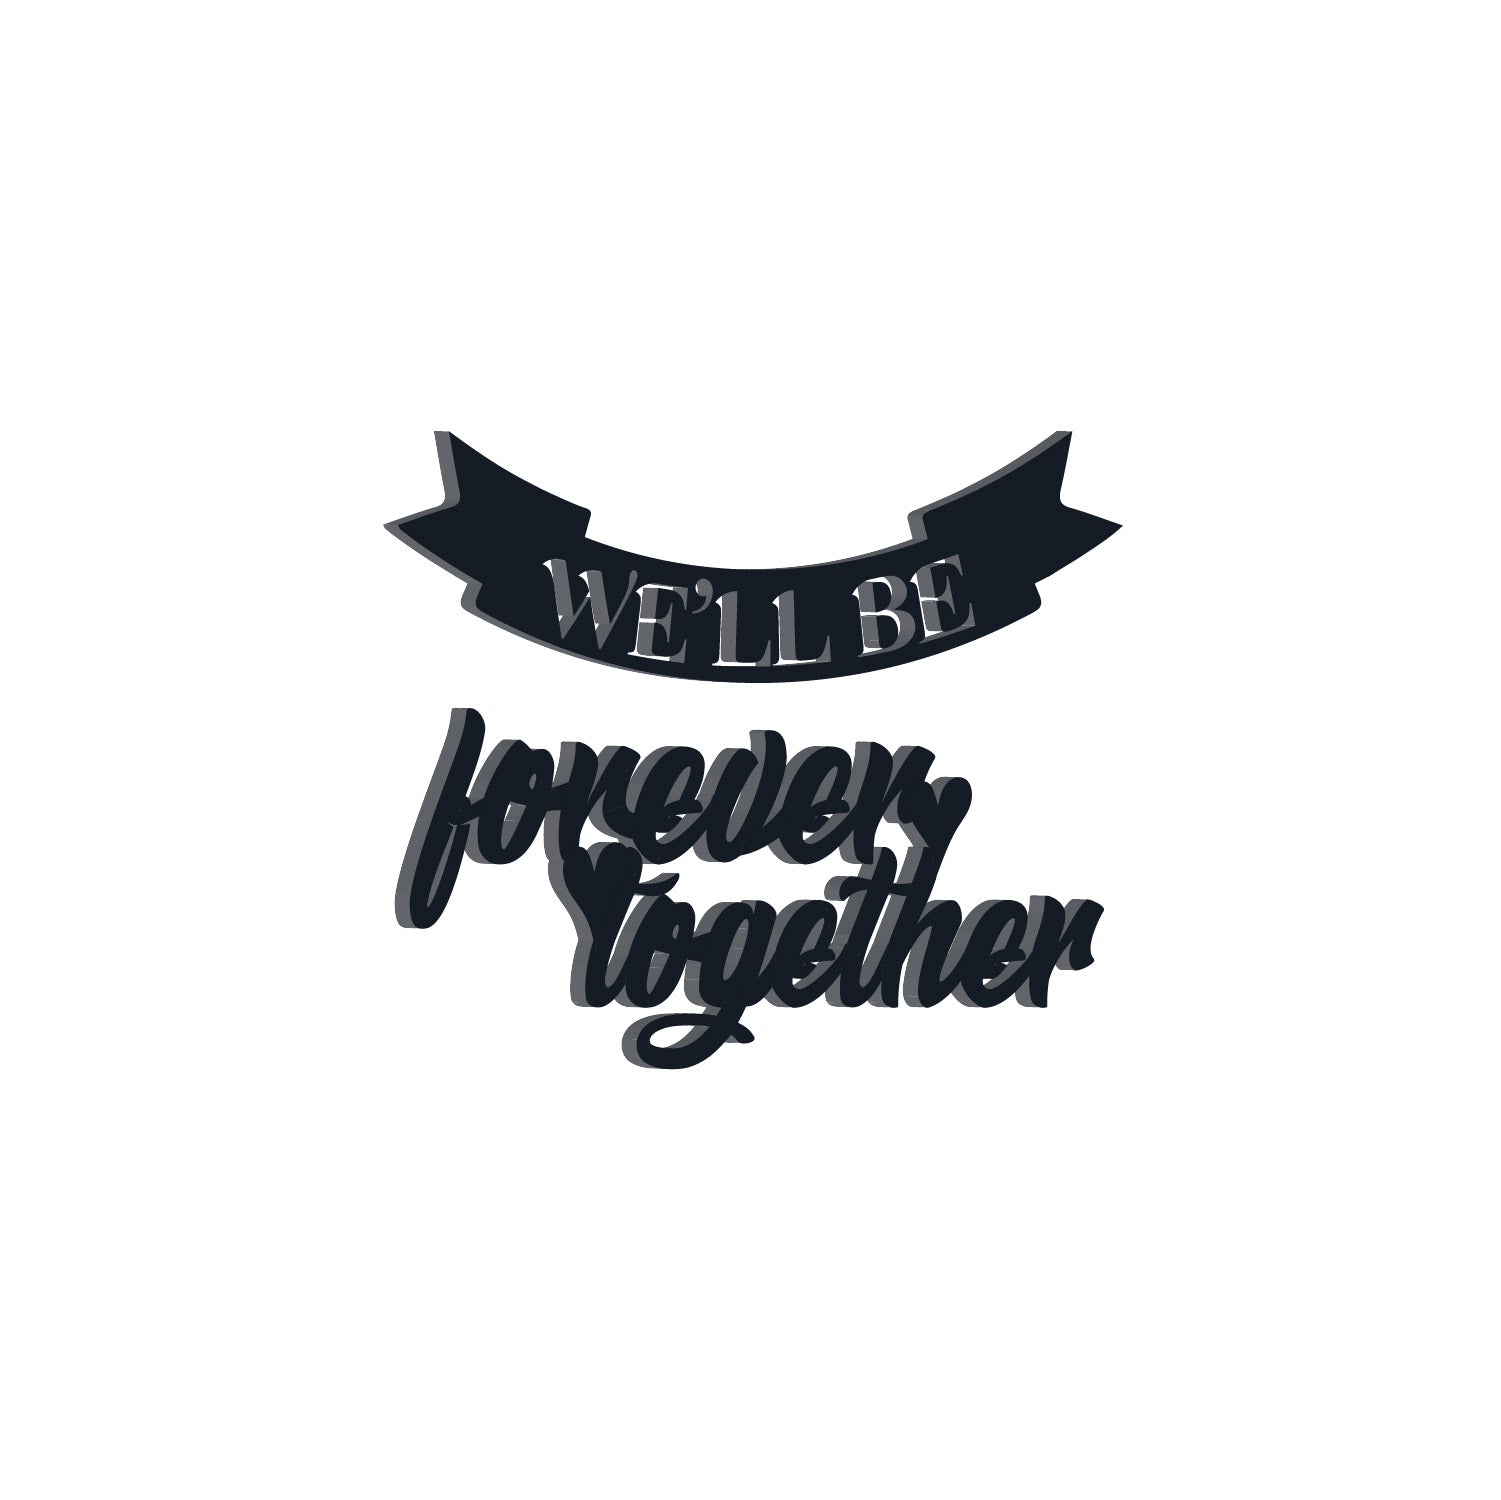 We Will Be Forever Together Love Theme Black Engineered Wood Wall Art Cutout, Ready To Hang Home Decor 4